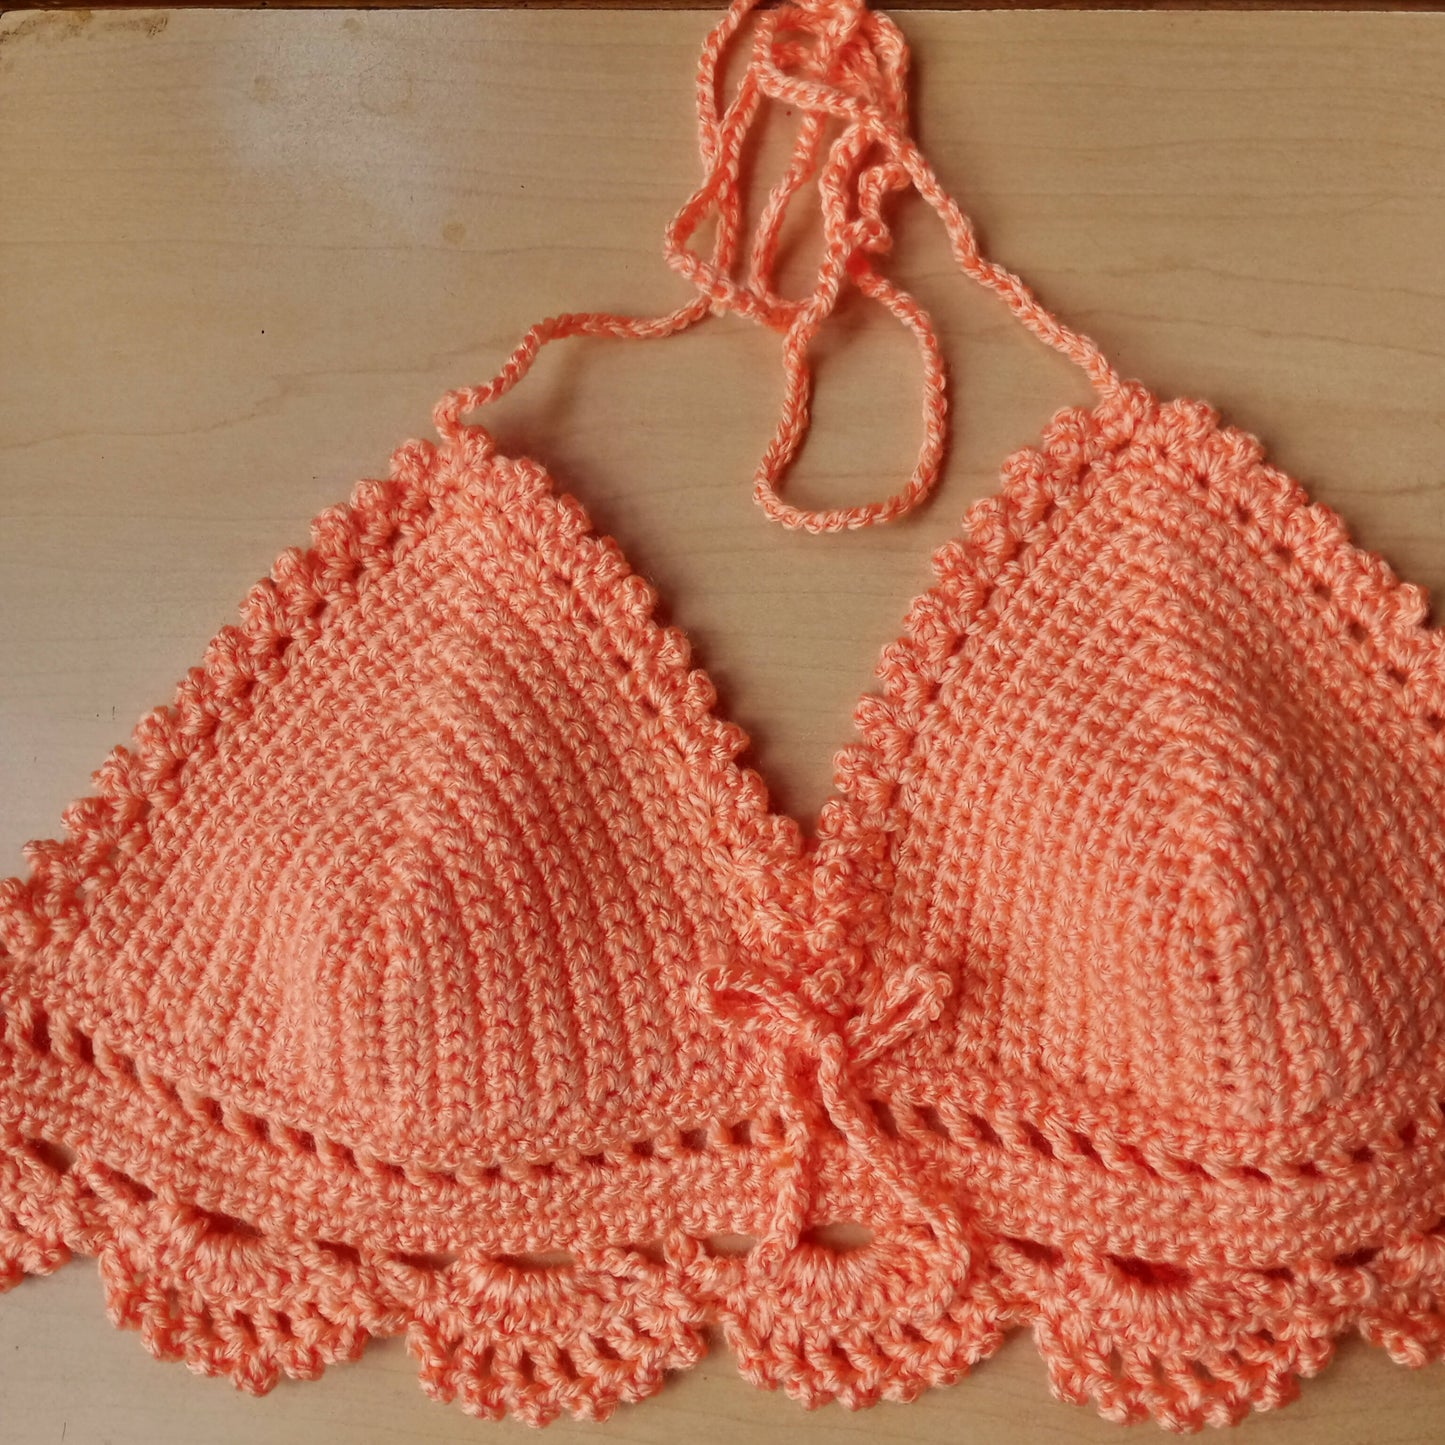 Crochet Bralette |Summer top | beach wear | yarn | multiple styling options| stylish | special gift | size small to medium | adjustable with tying lace | gifts with purpose by Done With Love